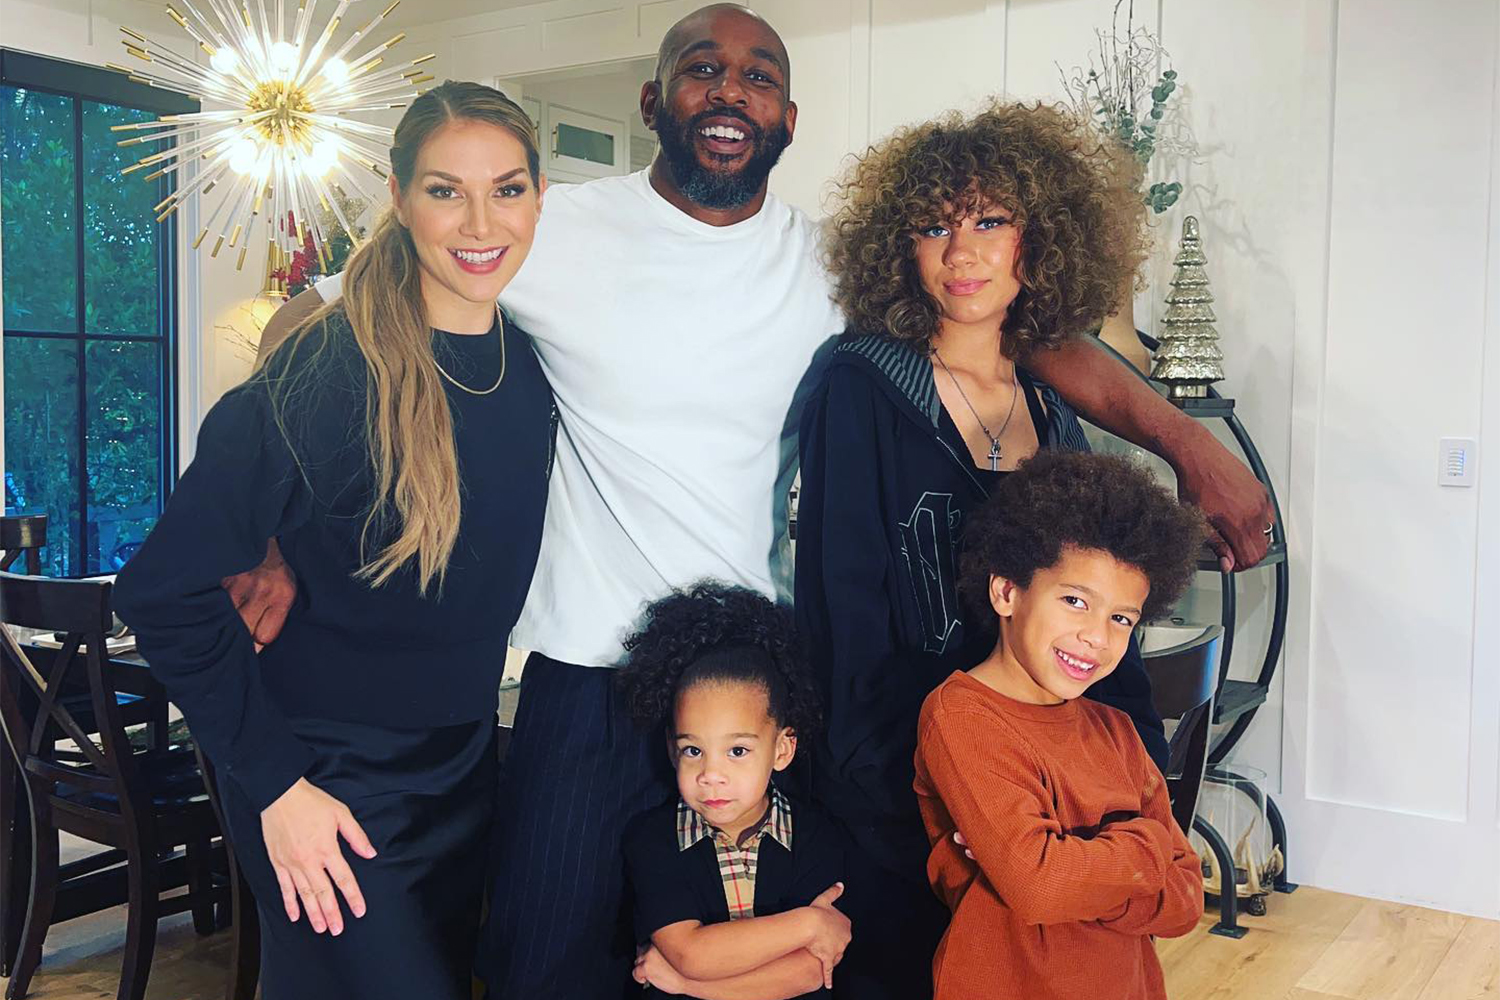 https://www.instagram.com/p/ClXjOpLL-GR/ allisonholker's profile picture allisonholker Verified HAPPY THANKSGIVING FROM THE BOSS FAMILY 2022!!! We are sending you all so much love and joy!! We are grateful for all of you for being such an incredible part of our lives!! And being a wife and mother to this family is just the best gift I could ever ask for in this life!! I am grateful for our families love, joy and health and hope to be able to keep spreading love!! #thebossfamily #thebosshouse #bossfamily #happythanksgiving @sir_twitch_alot @weslierboss @maddoxlboss @zaiaboss Edited · 21h